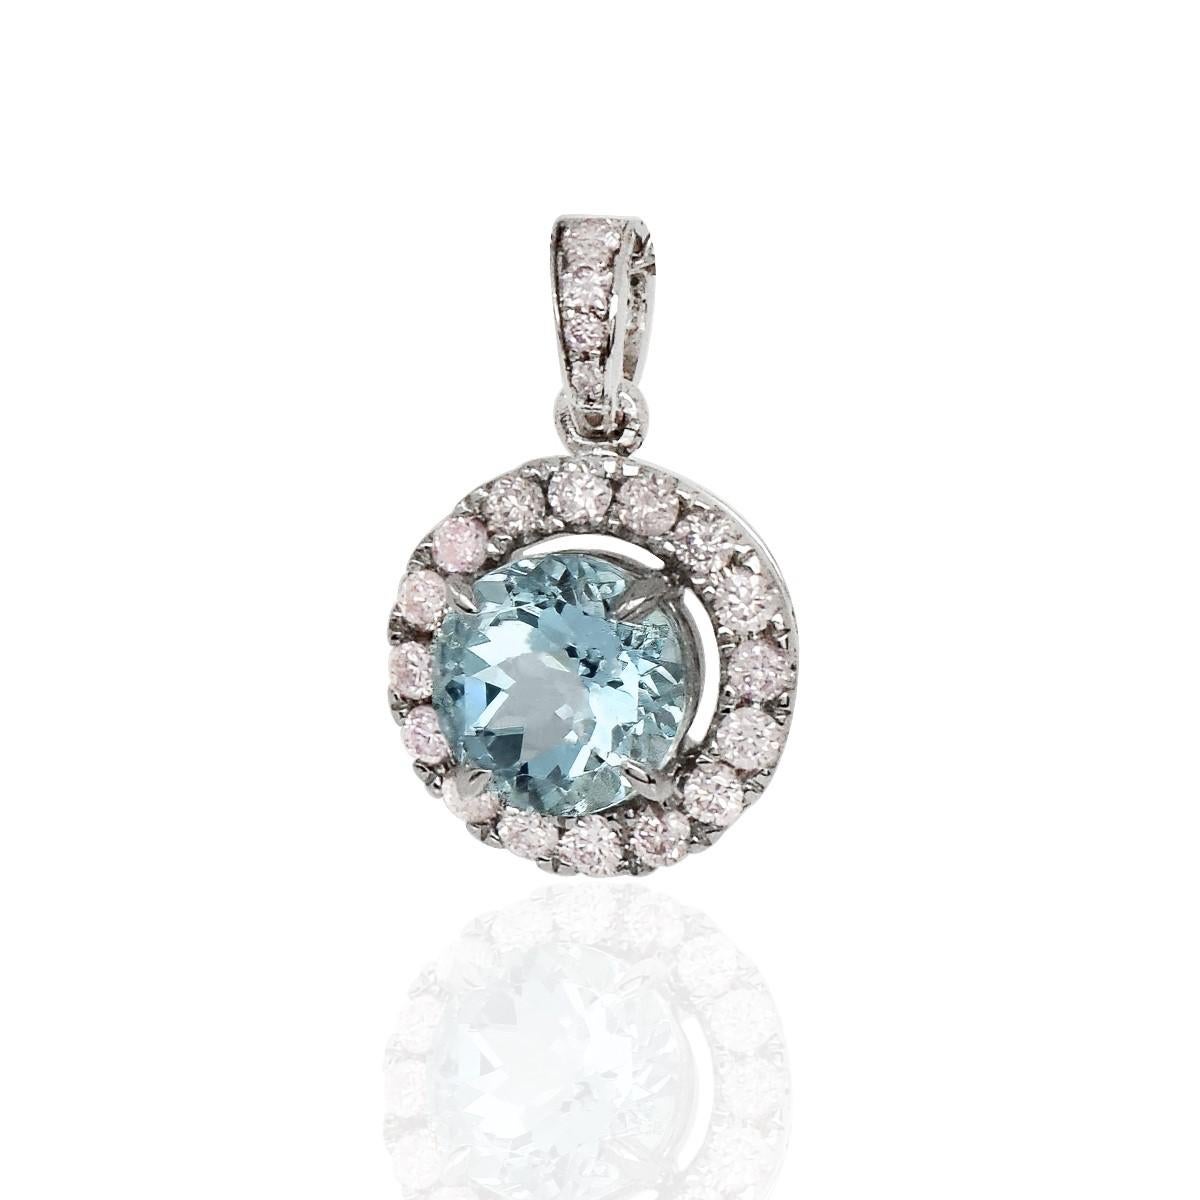 IGI 14K 0.86 Ct Aquamarine&Pink Diamonds Pendant Necklace In New Condition For Sale In Kaohsiung City, TW